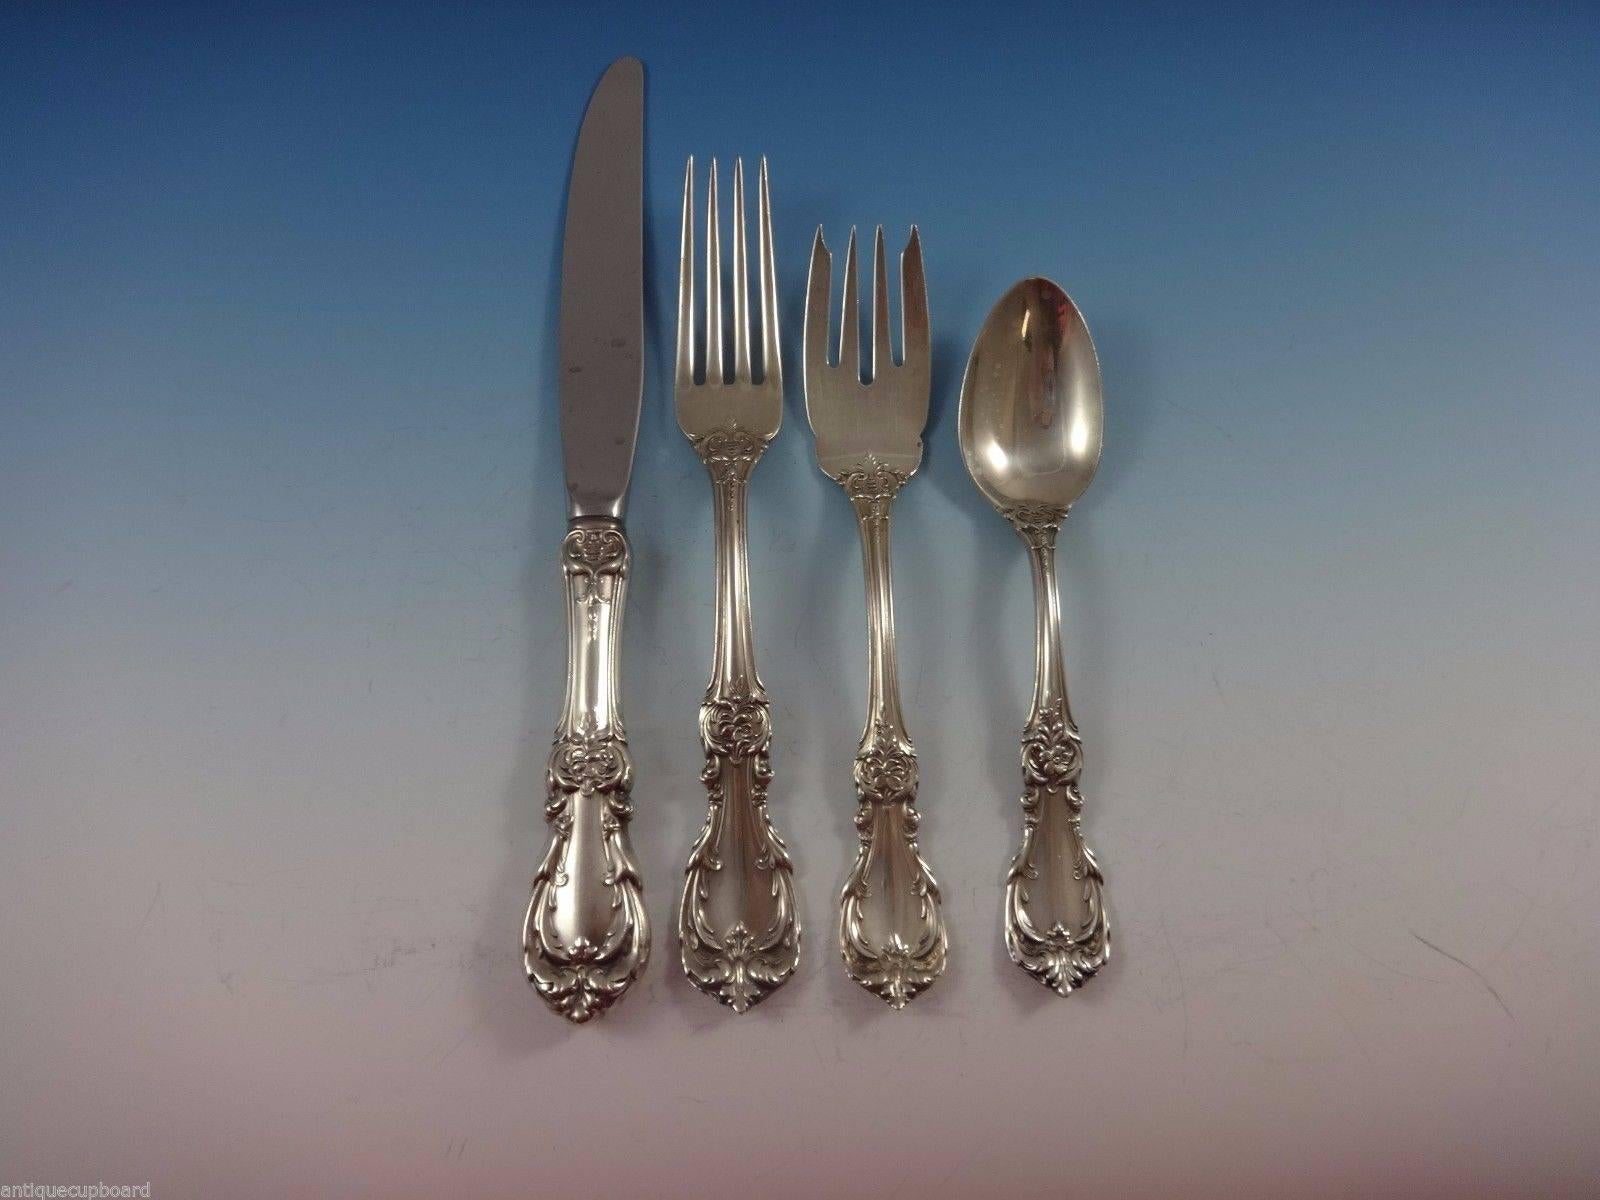 Inspired by the French Renaissance, the burgundy sterling silver flatware pattern from Reed & Barton is decorated with motifs of scrolls, leaves and flowers which captures old world elegance with up-to-date flourishes. 

Burgundy by Reed & Barton